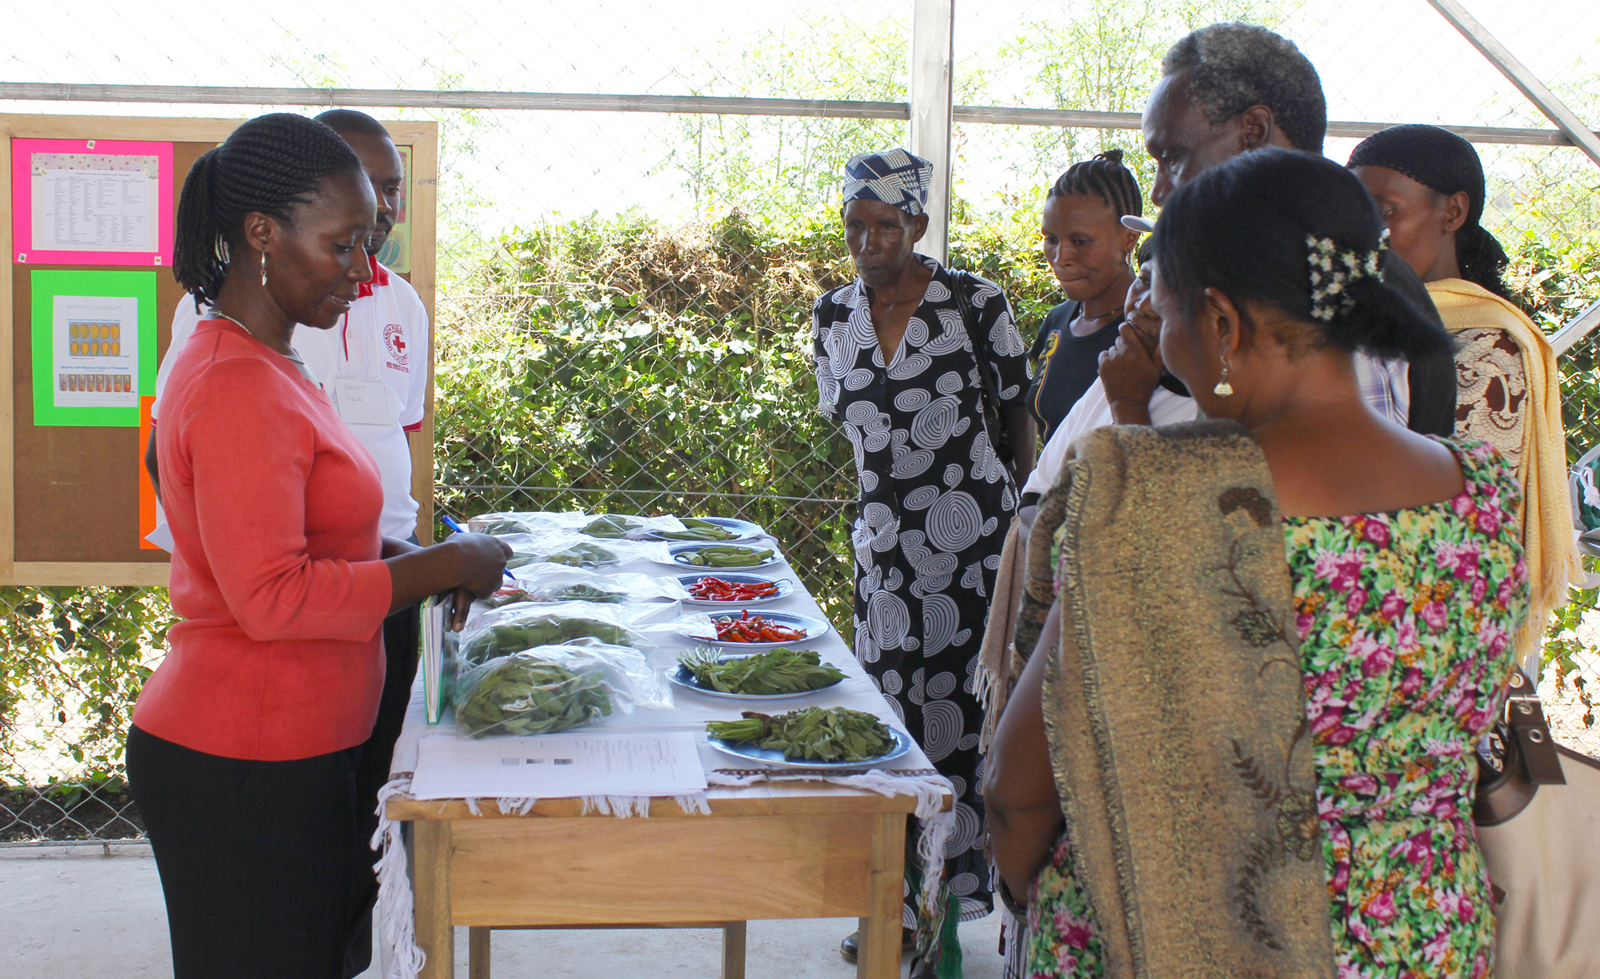 Woman leads a discussion over a table of vegetables on plates and in bags with a group of farmers who are listening